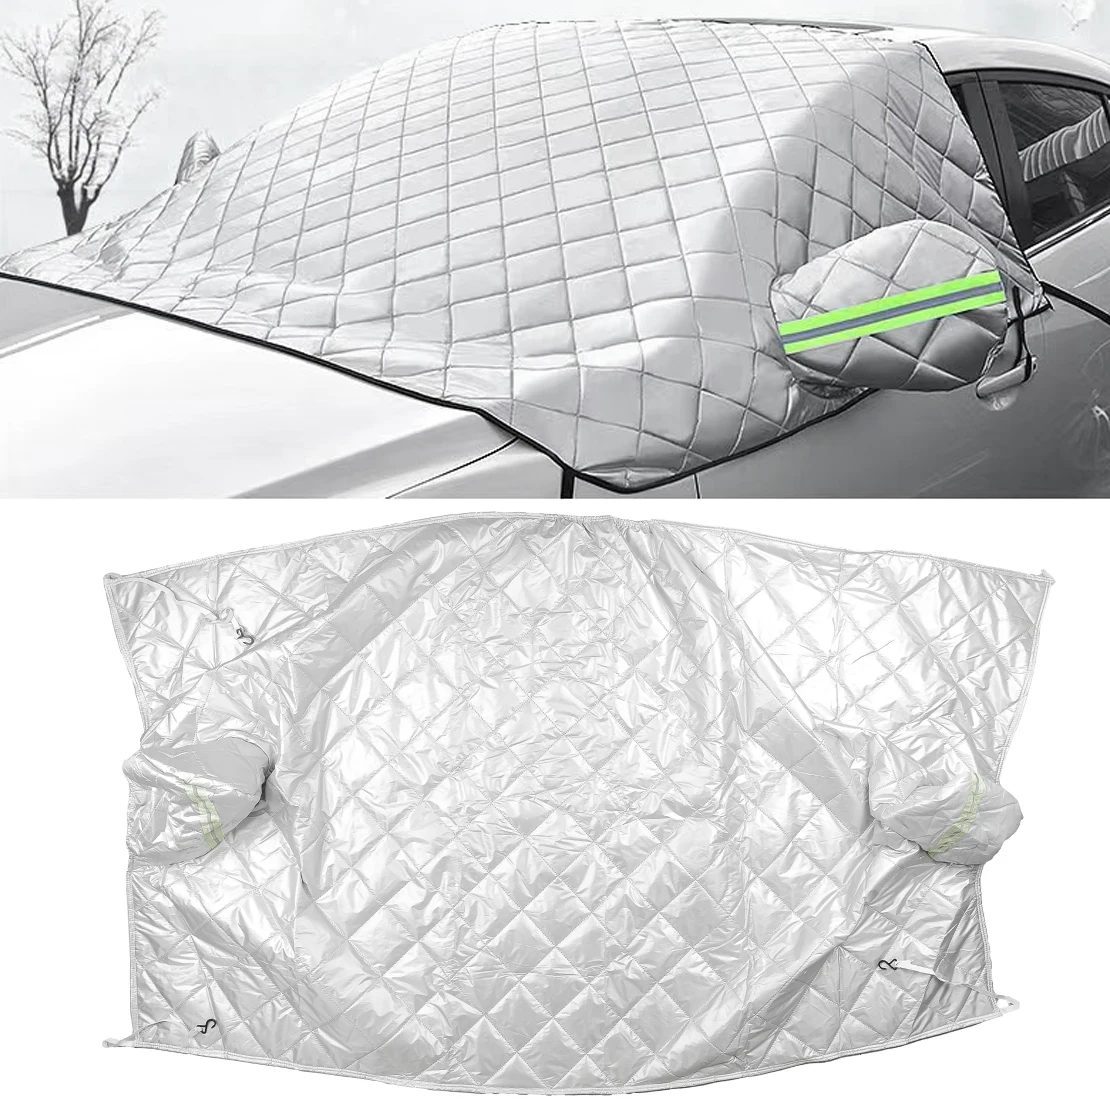 

Car Windshield Snow Cover Sunshade Winter Ice Frost Rain Blocked Protector Dust Guard Fit for Most Cars Silver Grey